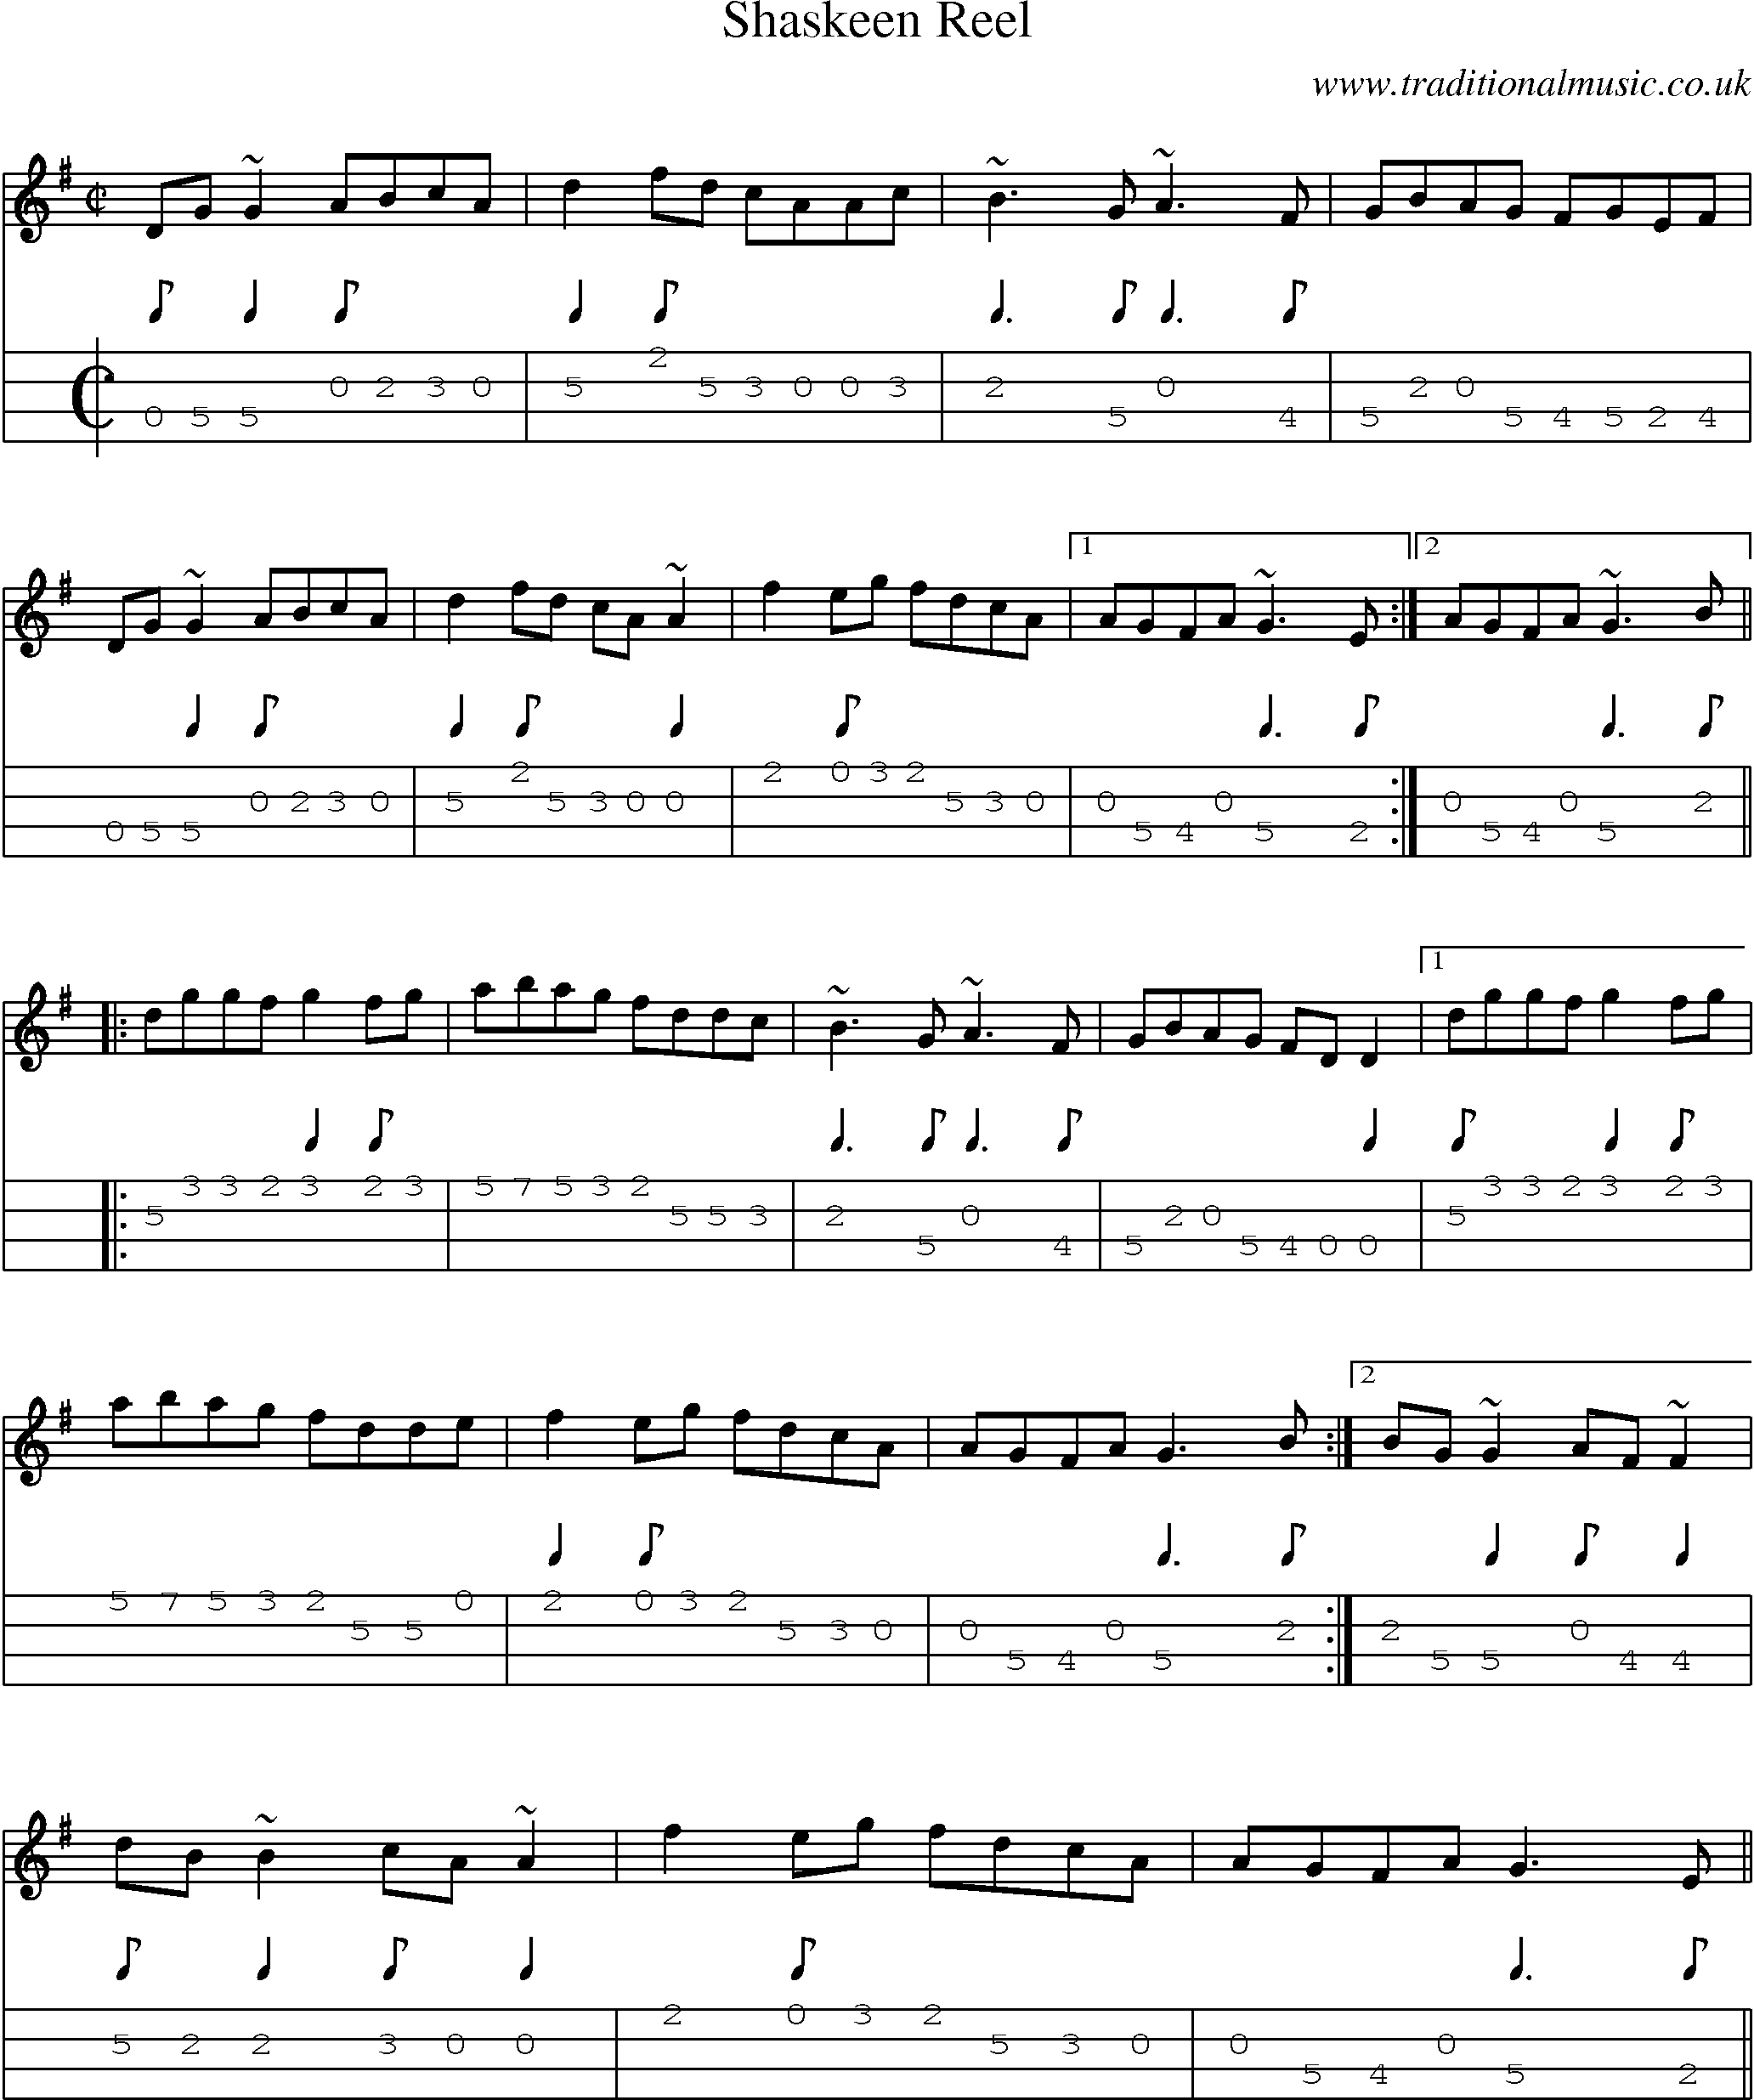 Music Score and Mandolin Tabs for Shaskeen Reel